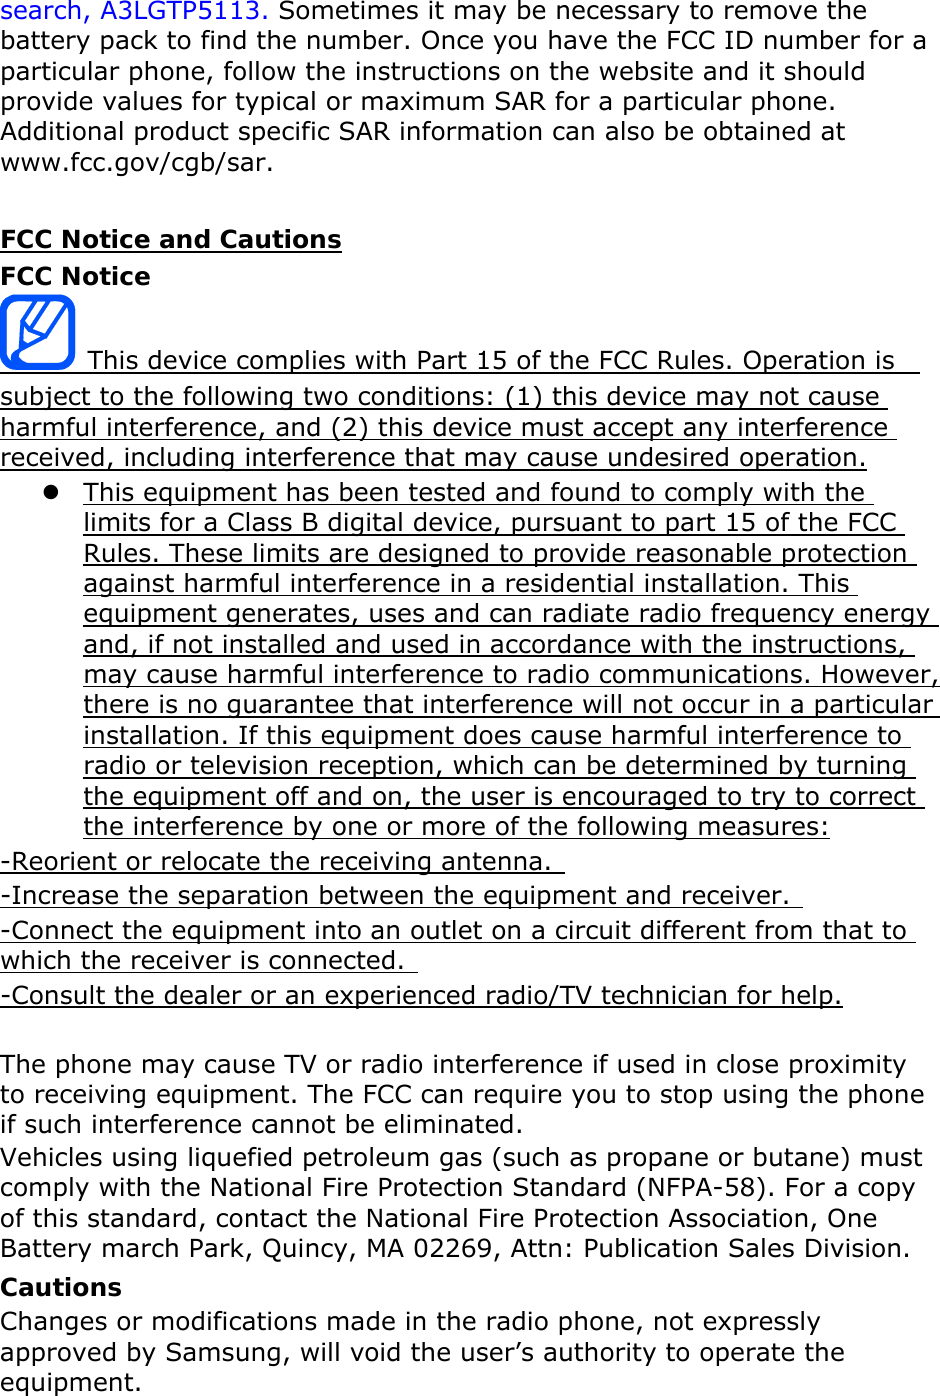 search, A3LGTP5113. Sometimes it may be necessary to remove the battery pack to find the number. Once you have the FCC ID number for a particular phone, follow the instructions on the website and it should provide values for typical or maximum SAR for a particular phone. Additional product specific SAR information can also be obtained at www.fcc.gov/cgb/sar.  FCC Notice and Cautions FCC Notice  This device complies with Part 15 of the FCC Rules. Operation is   subject to the following two conditions: (1) this device may not cause harmful interference, and (2) this device must accept any interference received, including interference that may cause undesired operation. z This equipment has been tested and found to comply with the limits for a Class B digital device, pursuant to part 15 of the FCC Rules. These limits are designed to provide reasonable protection against harmful interference in a residential installation. This equipment generates, uses and can radiate radio frequency energy and, if not installed and used in accordance with the instructions, may cause harmful interference to radio communications. However, there is no guarantee that interference will not occur in a particular installation. If this equipment does cause harmful interference to radio or television reception, which can be determined by turning the equipment off and on, the user is encouraged to try to correct the interference by one or more of the following measures: -Reorient or relocate the receiving antenna.   -Increase the separation between the equipment and receiver.   -Connect the equipment into an outlet on a circuit different from that to which the receiver is connected.   -Consult the dealer or an experienced radio/TV technician for help.  The phone may cause TV or radio interference if used in close proximity to receiving equipment. The FCC can require you to stop using the phone if such interference cannot be eliminated. Vehicles using liquefied petroleum gas (such as propane or butane) must comply with the National Fire Protection Standard (NFPA-58). For a copy of this standard, contact the National Fire Protection Association, One Battery march Park, Quincy, MA 02269, Attn: Publication Sales Division. Cautions Changes or modifications made in the radio phone, not expressly approved by Samsung, will void the user’s authority to operate the equipment. 